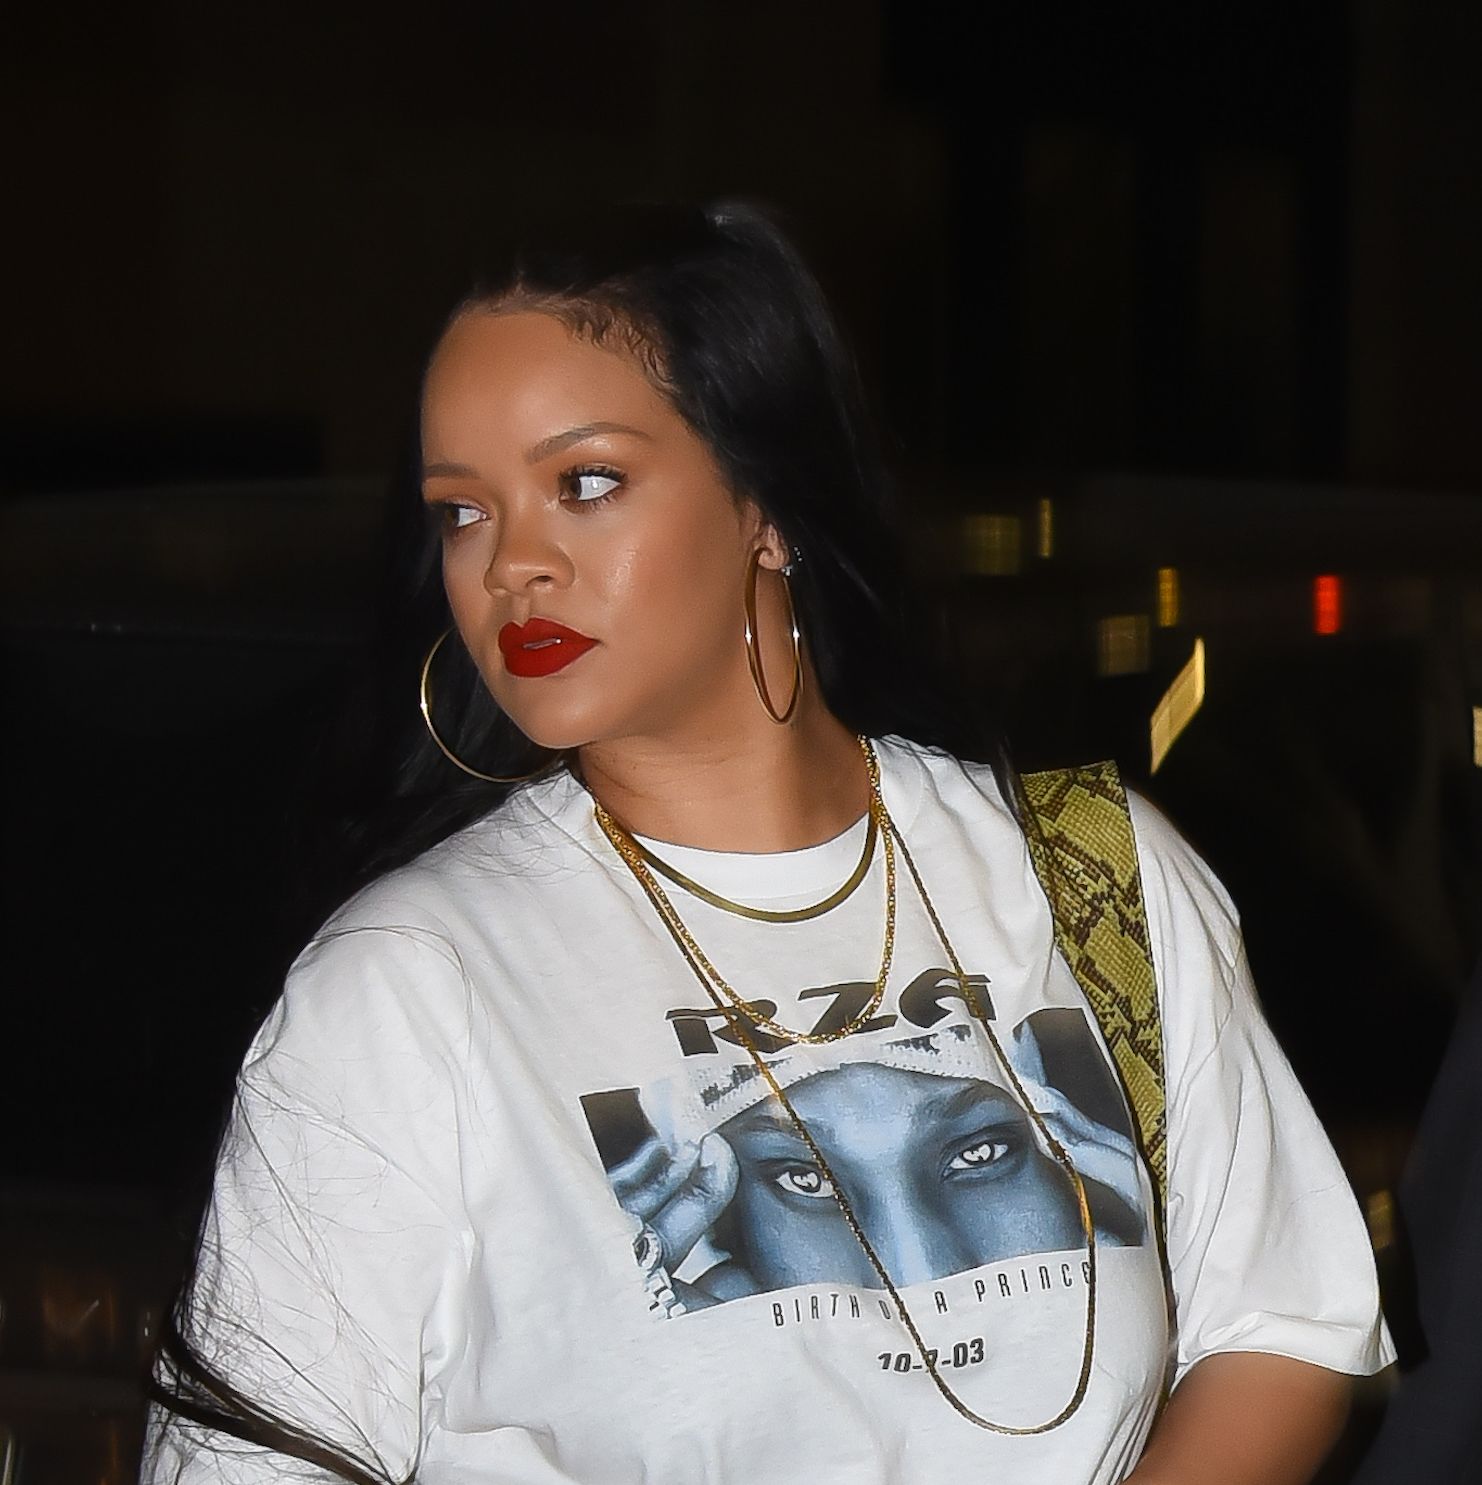 Rihanna Stopped to Help Restaurant Staff Clean Up After Girl's Night Out